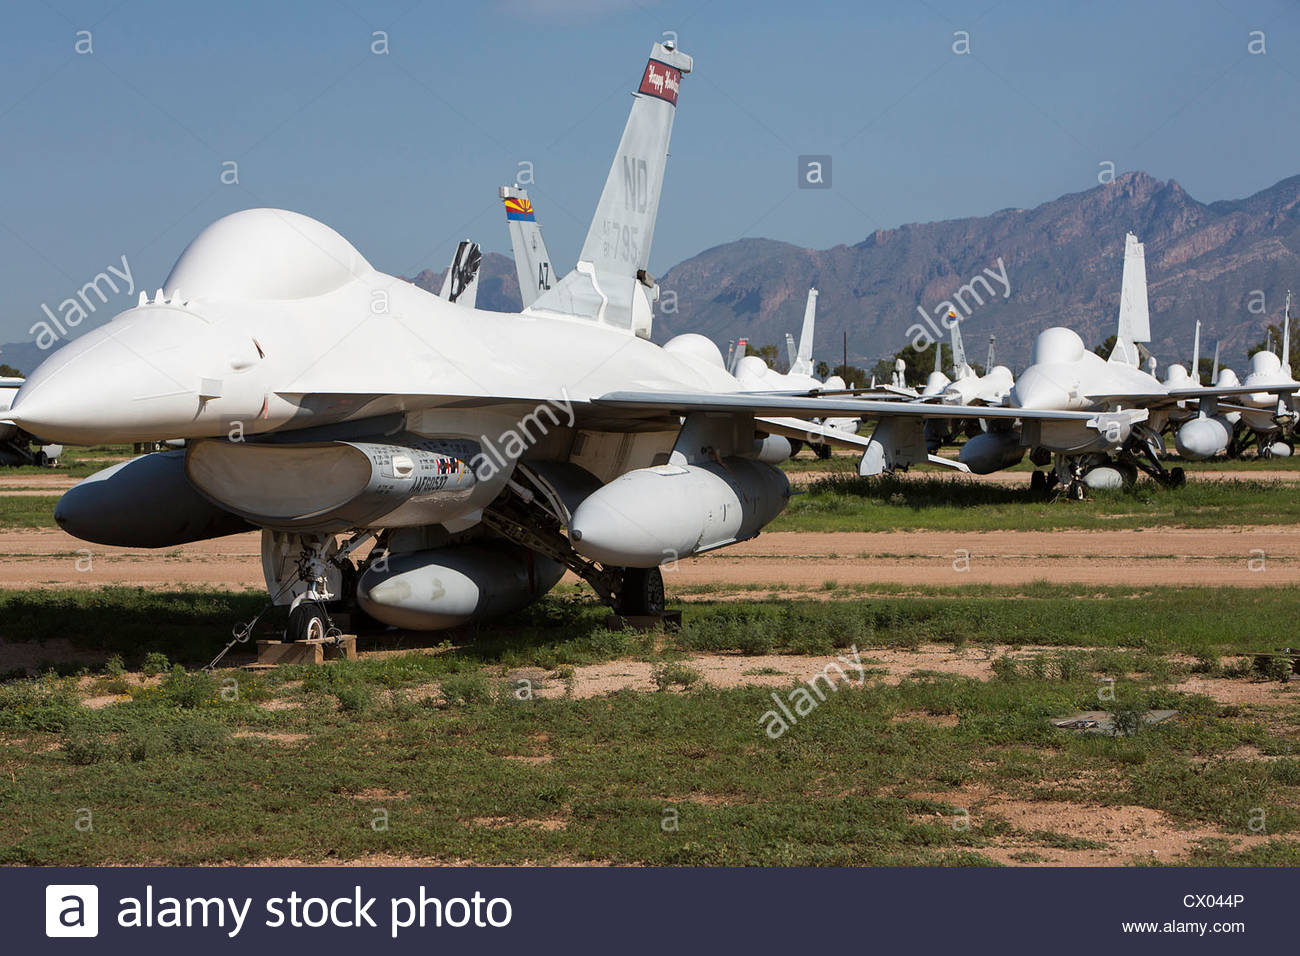 f-16-fighting-falcon-aircraft-in-storage-at-the-309th-aerospace-maintenance-CX044P.jpg